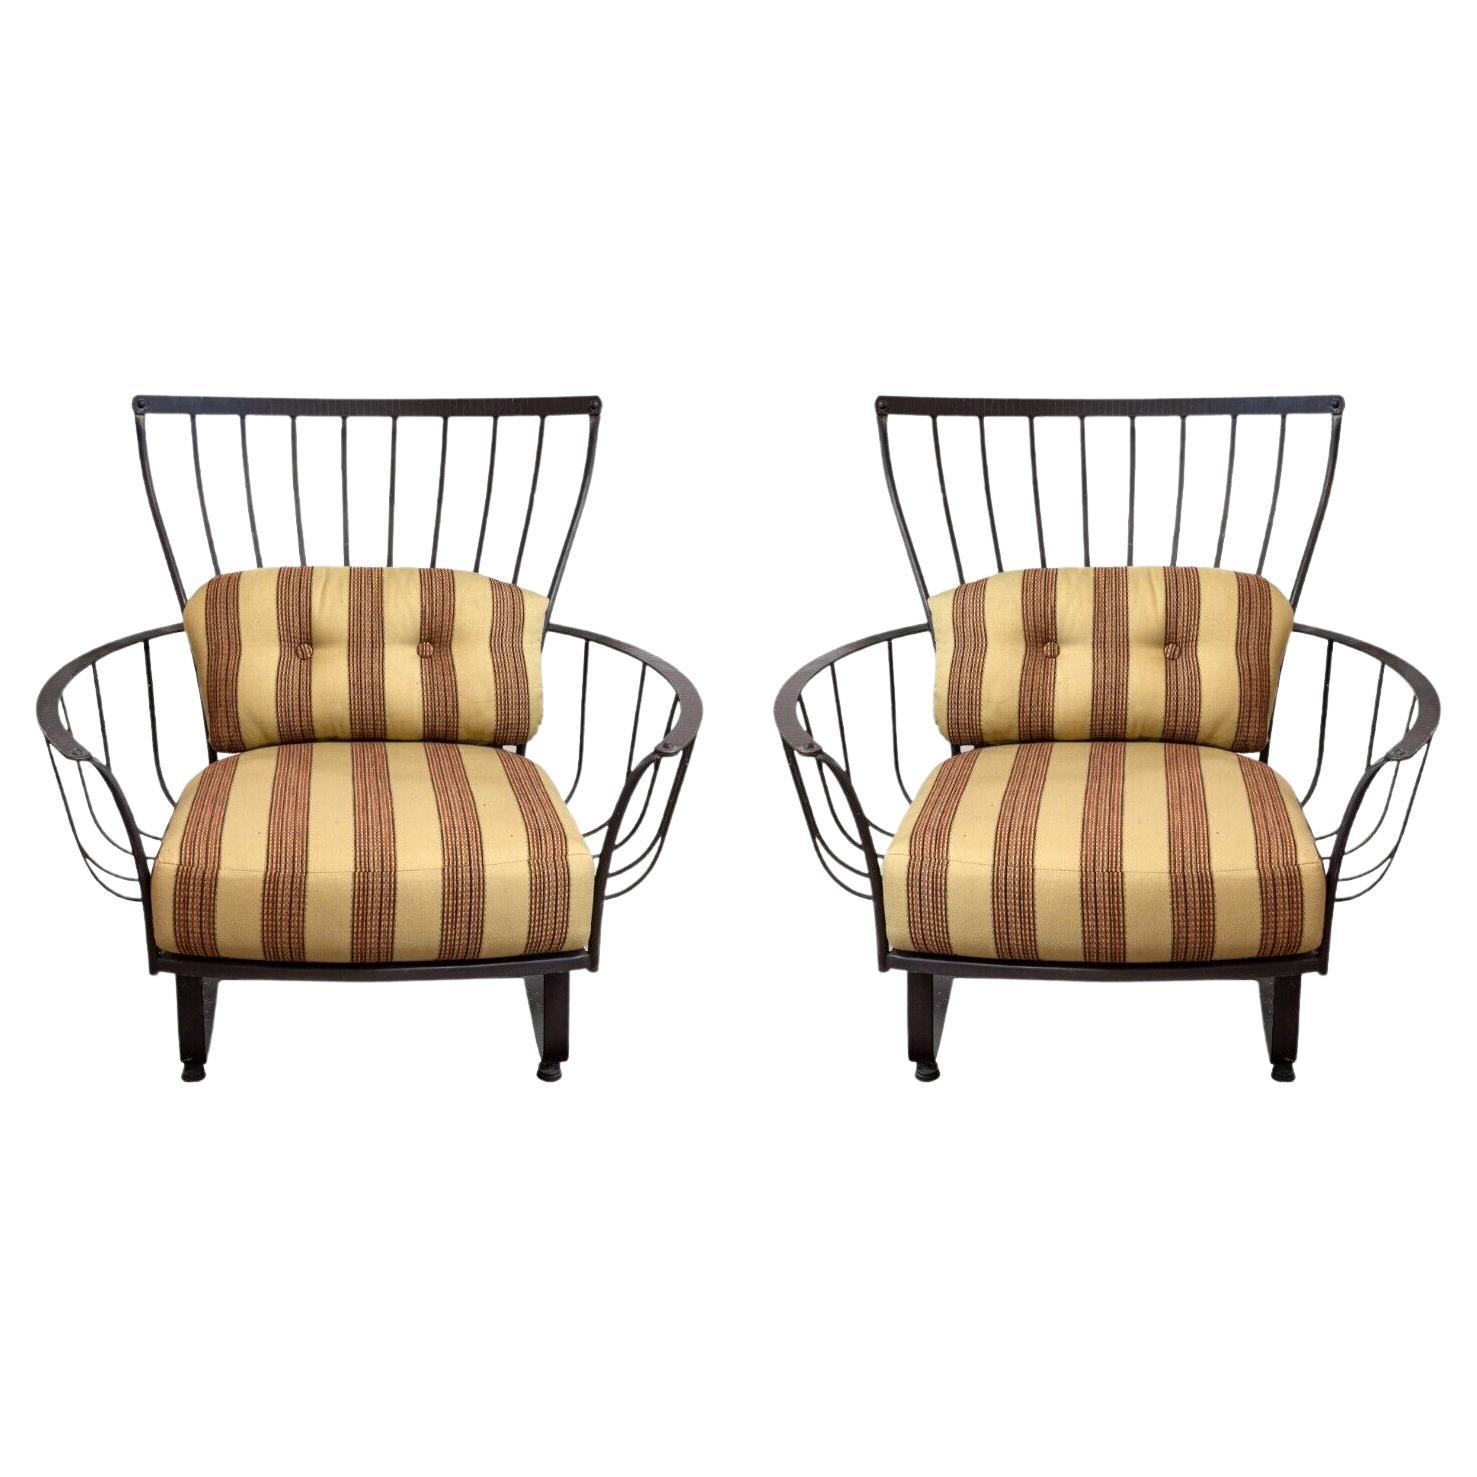 Vintage Pair of OW Lee Wrought Iron Oversized Patio Rocking Chairs with Cushions